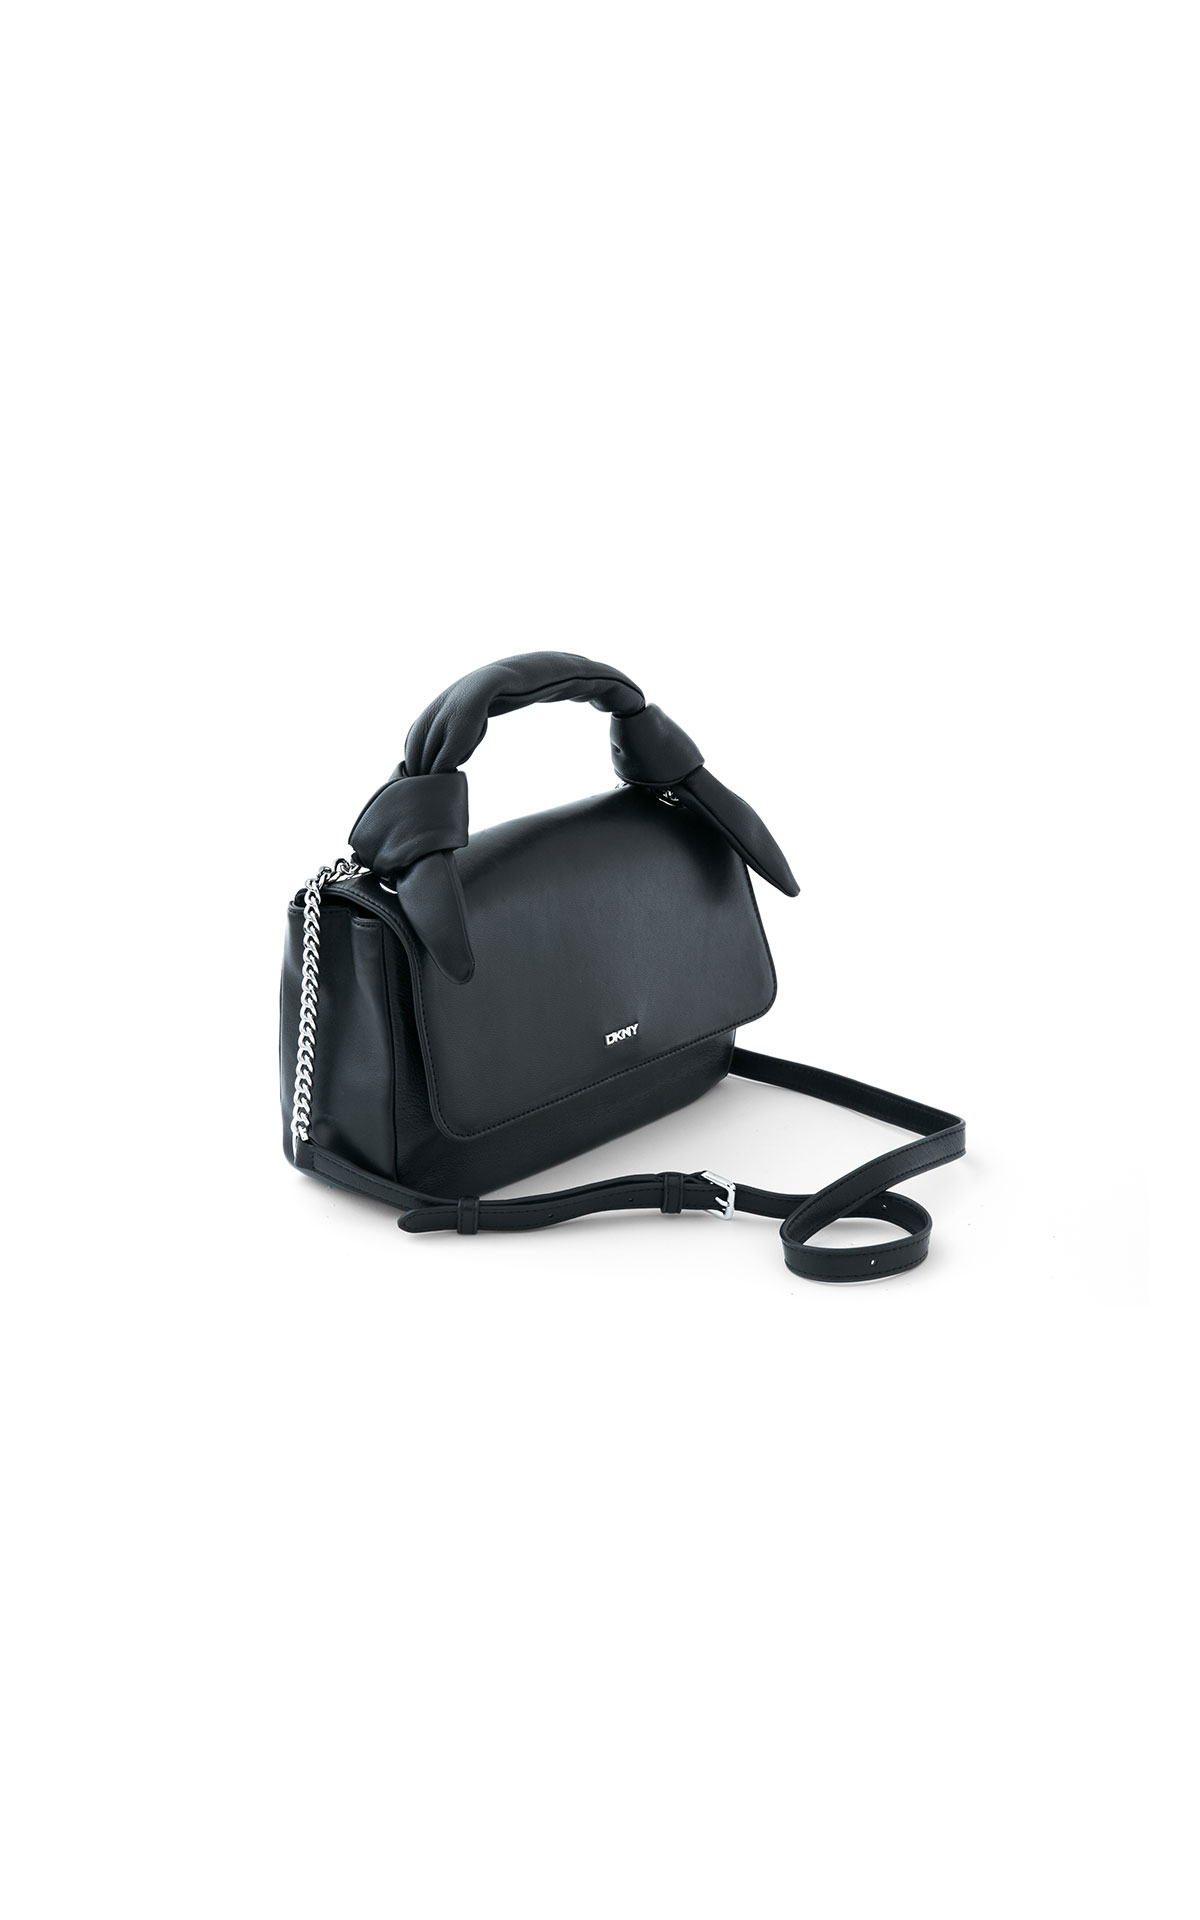 DKNY Sophie crossbody bag from Bicester Village